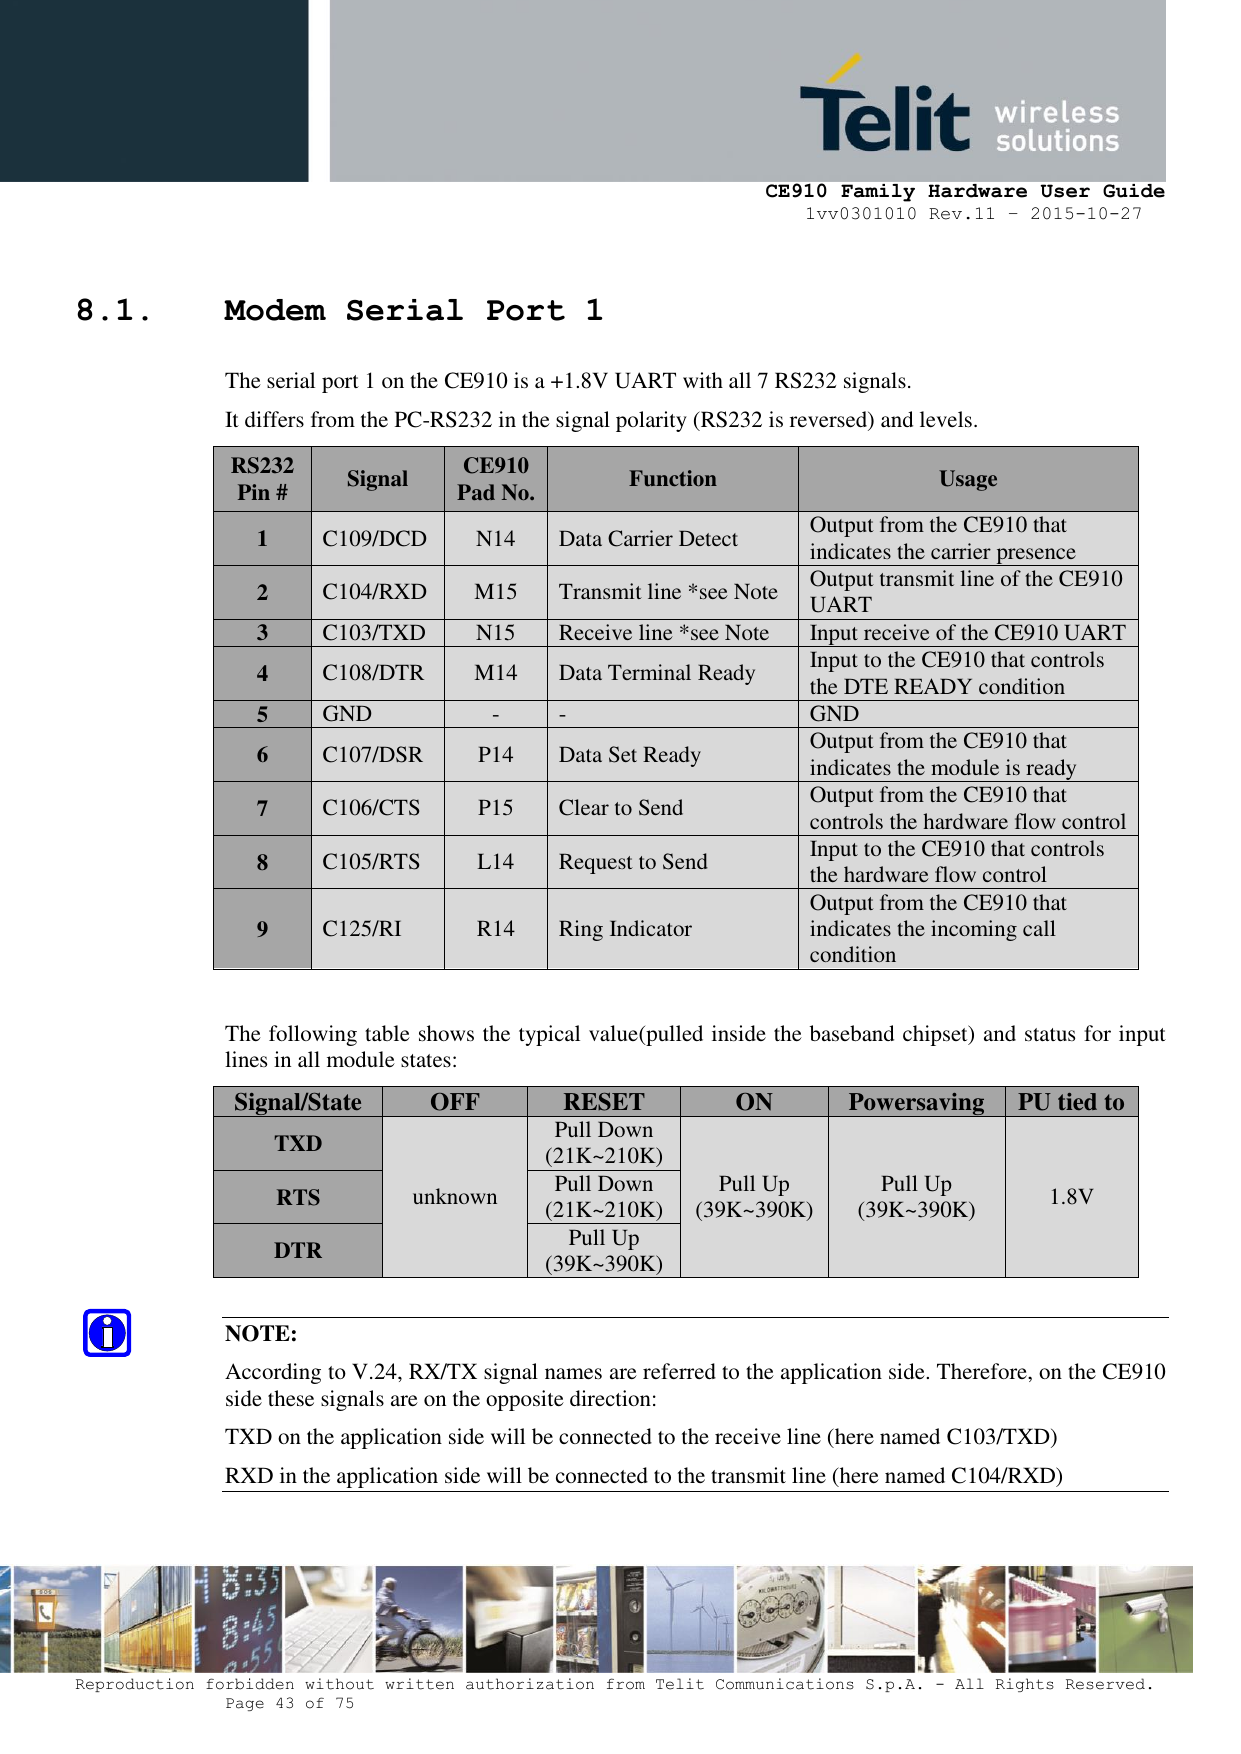     CE910 Family Hardware User Guide 1vv0301010 Rev.11 – 2015-10-27 Reproduction forbidden without written authorization from Telit Communications S.p.A. - All Rights Reserved.    Page 43 of 75                                                     8.1. Modem Serial Port 1 The serial port 1 on the CE910 is a +1.8V UART with all 7 RS232 signals.  It differs from the PC-RS232 in the signal polarity (RS232 is reversed) and levels. RS232 Pin # Signal CE910 Pad No. Function Usage 1 C109/DCD N14 Data Carrier Detect Output from the CE910 that indicates the carrier presence 2 C104/RXD M15 Transmit line *see Note Output transmit line of the CE910 UART 3 C103/TXD N15 Receive line *see Note Input receive of the CE910 UART 4 C108/DTR M14 Data Terminal Ready Input to the CE910 that controls the DTE READY condition 5 GND - - GND 6 C107/DSR P14 Data Set Ready Output from the CE910 that indicates the module is ready 7 C106/CTS P15 Clear to Send Output from the CE910 that controls the hardware flow control 8 C105/RTS L14 Request to Send Input to the CE910 that controls the hardware flow control 9 C125/RI R14 Ring Indicator Output from the CE910 that indicates the incoming call condition  The following table shows the typical value(pulled inside the baseband chipset) and status for input lines in all module states: Signal/State OFF RESET ON Powersaving PU tied to TXD unknown Pull Down (21K~210K) Pull Up (39K~390K) Pull Up (39K~390K) 1.8V RTS Pull Down (21K~210K) DTR Pull Up (39K~390K)  NOTE: According to V.24, RX/TX signal names are referred to the application side. Therefore, on the CE910 side these signals are on the opposite direction: TXD on the application side will be connected to the receive line (here named C103/TXD) RXD in the application side will be connected to the transmit line (here named C104/RXD)  